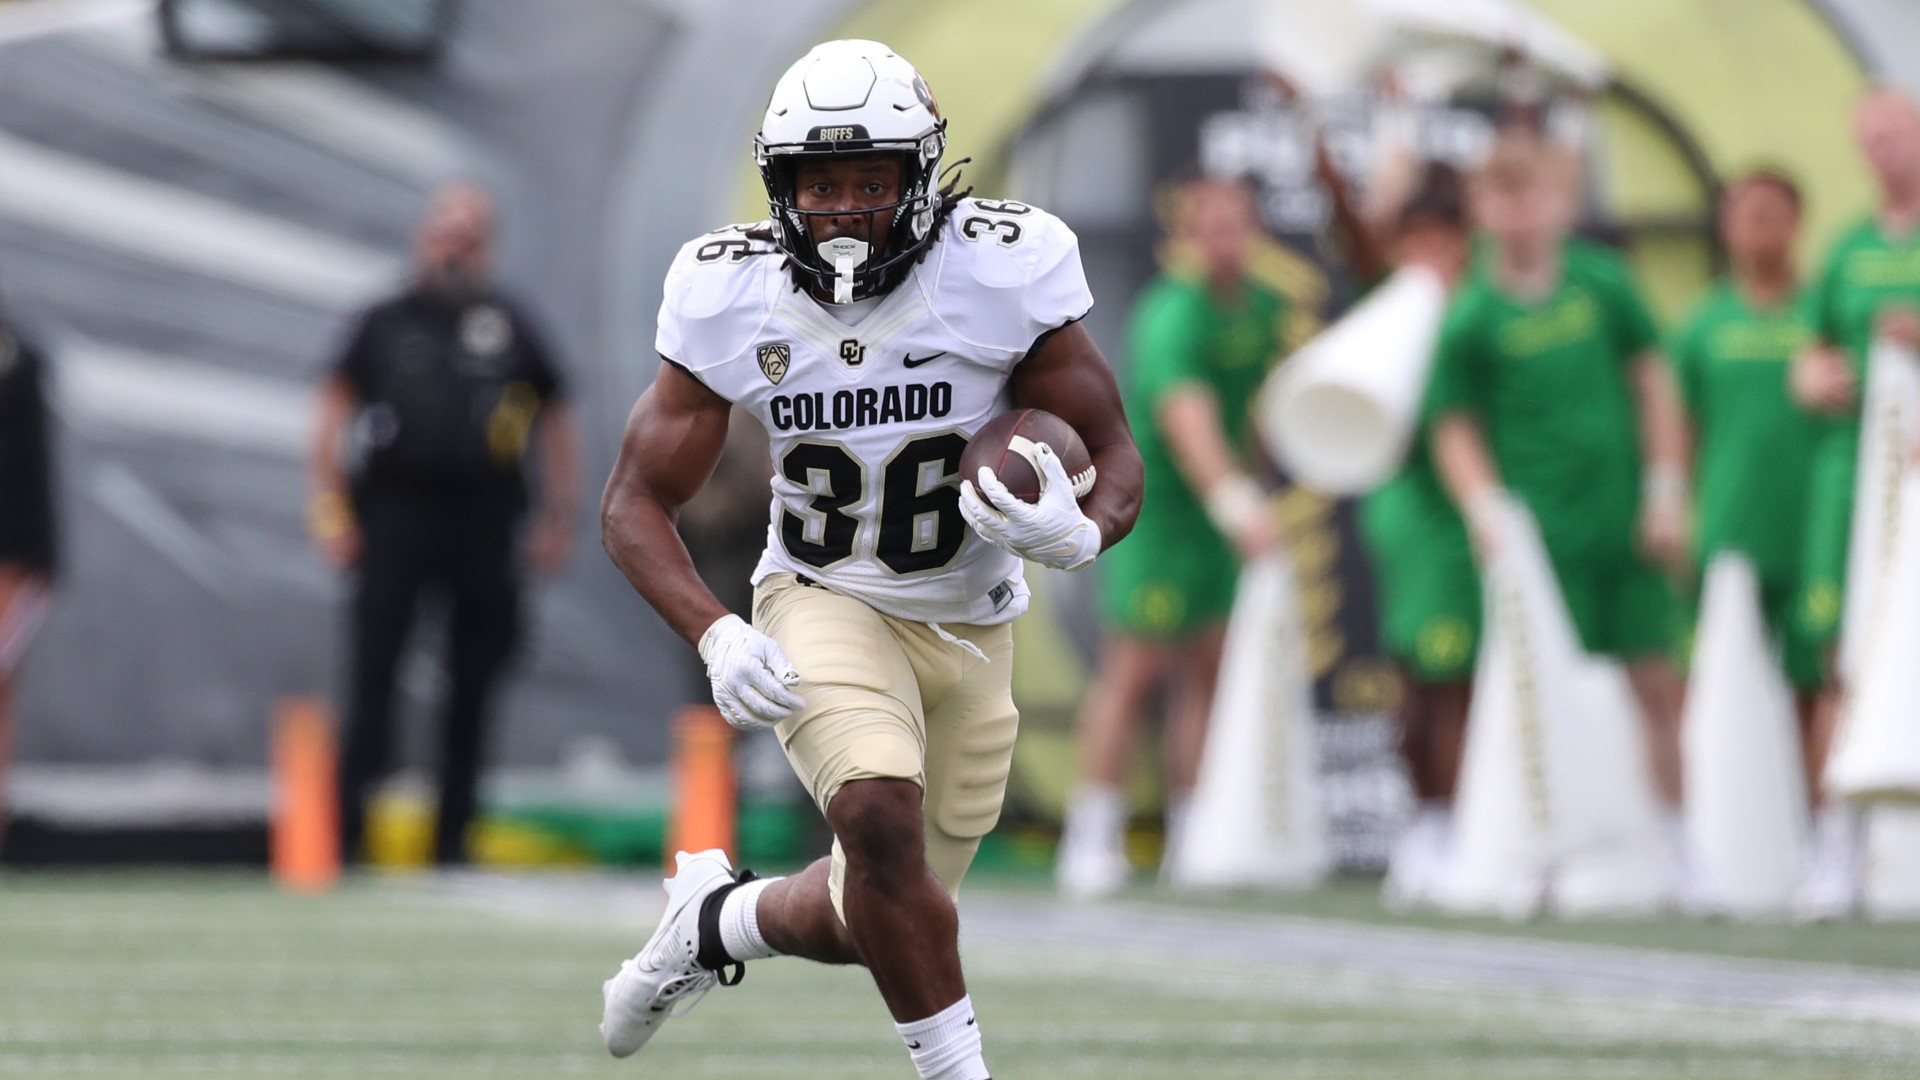 The Colorado Buffaloes suffered their first loss under new head coach Deion Sanders.